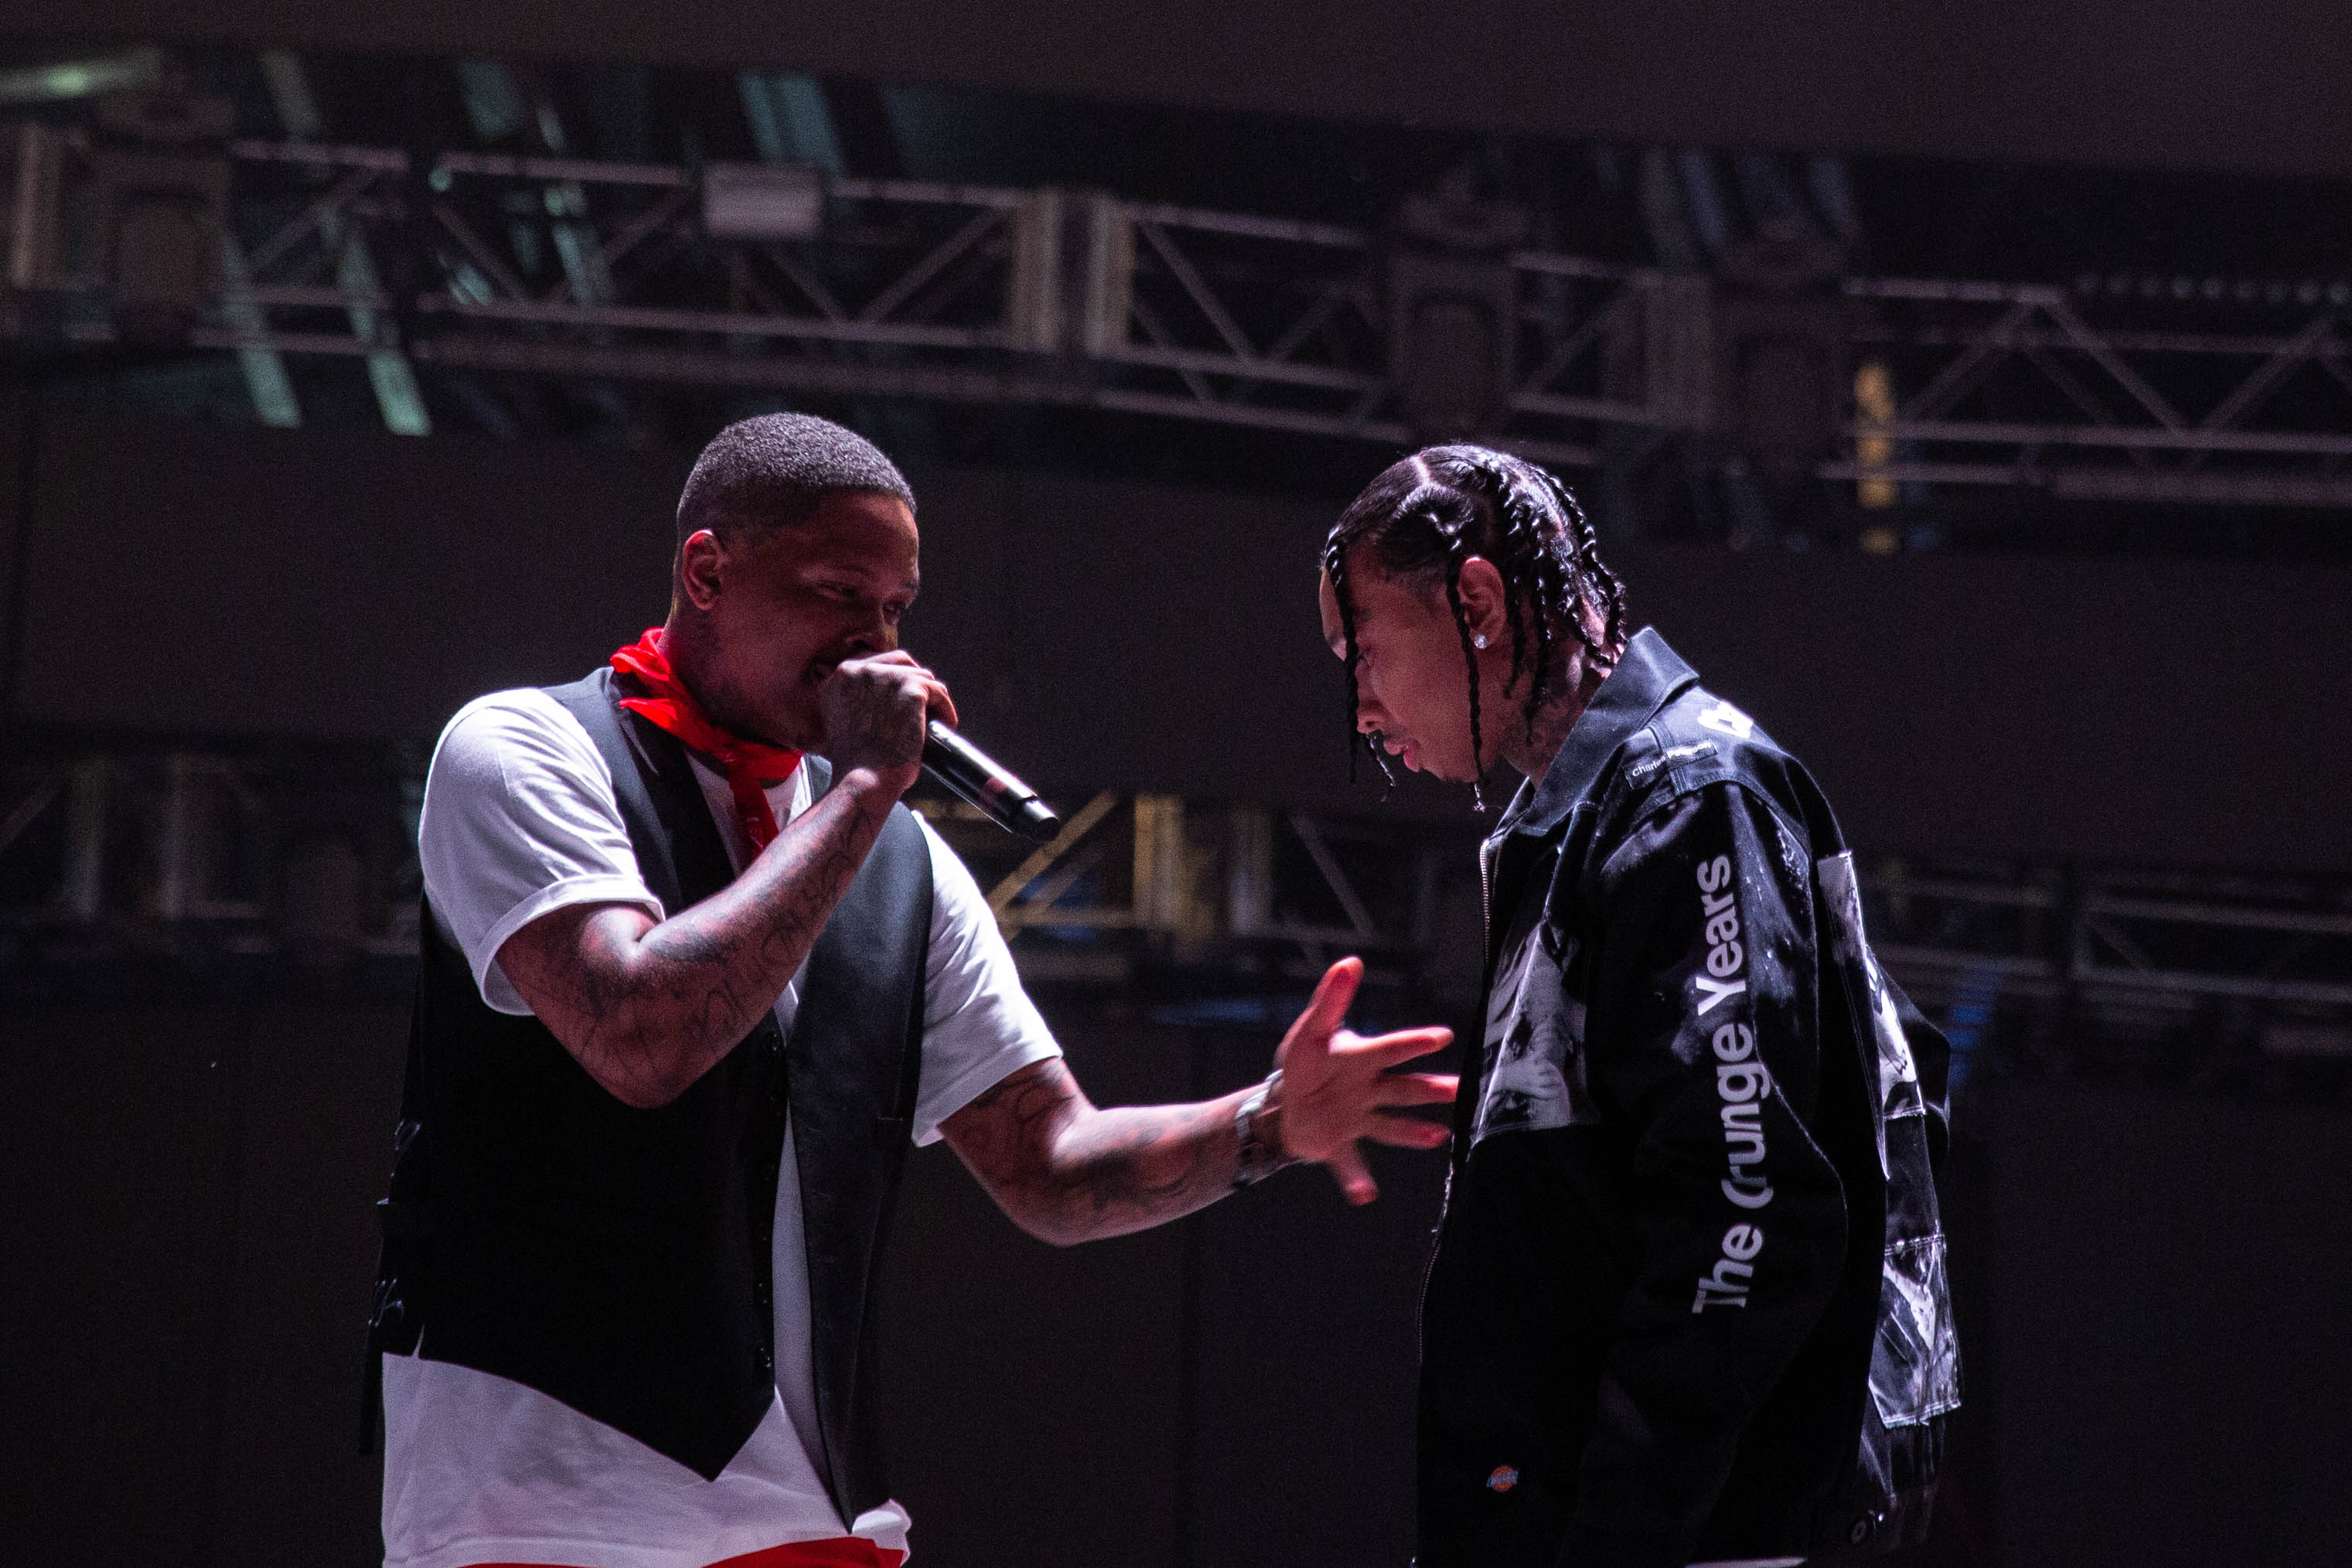 Drake Extends Co-Sign To YG & Tyga: “Been Running This Sh*t”